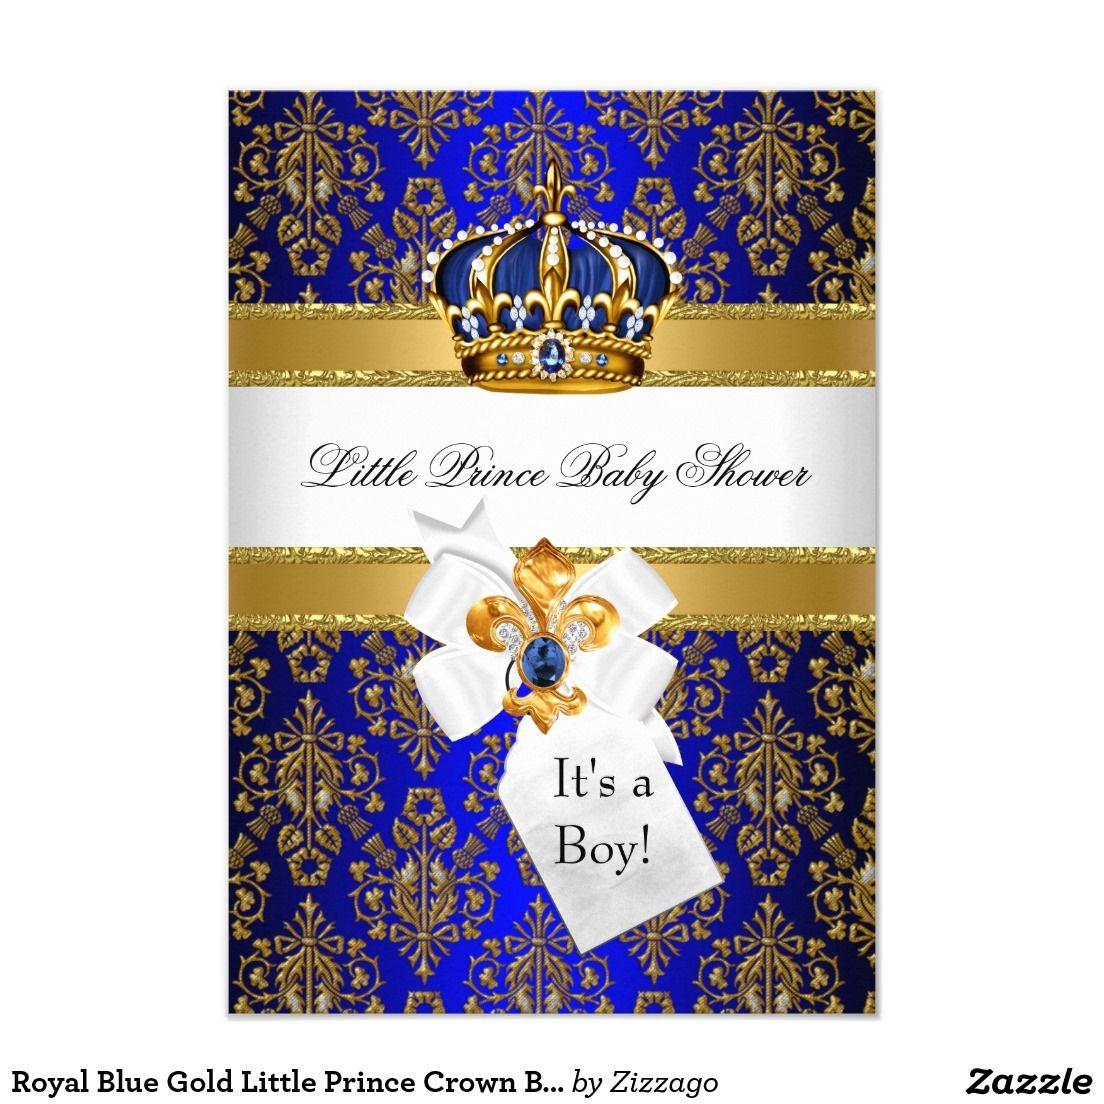 Red and Gold with a Crown of a B Logo - Royal Blue Gold Little Prince Crown Baby Shower Invitation. Stuff